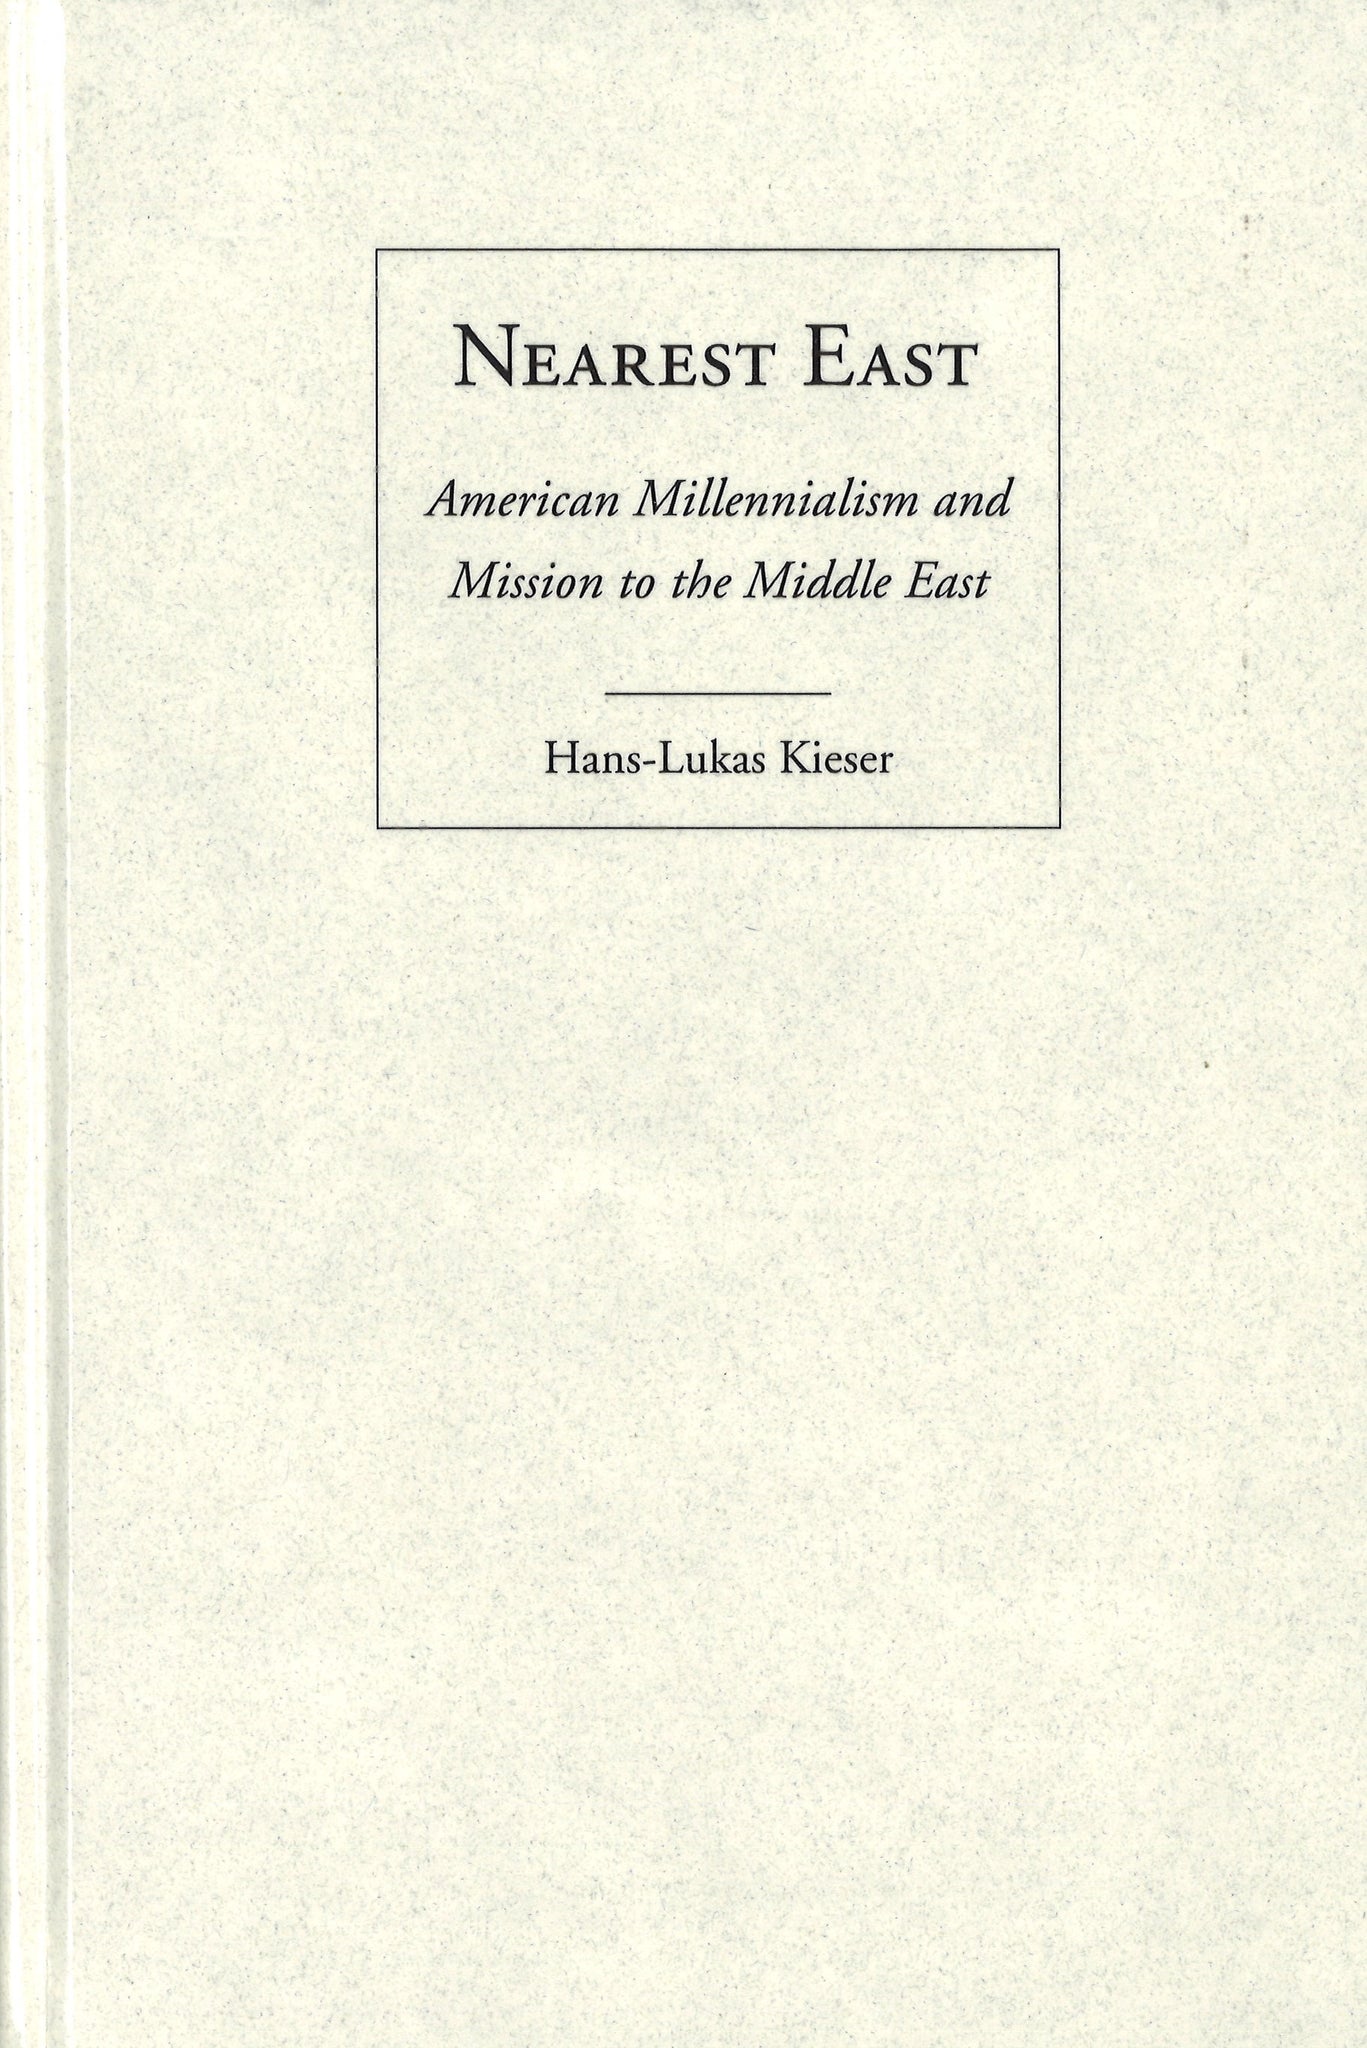 NEAREST EAST: American Millennialism and Mission to the Middle East